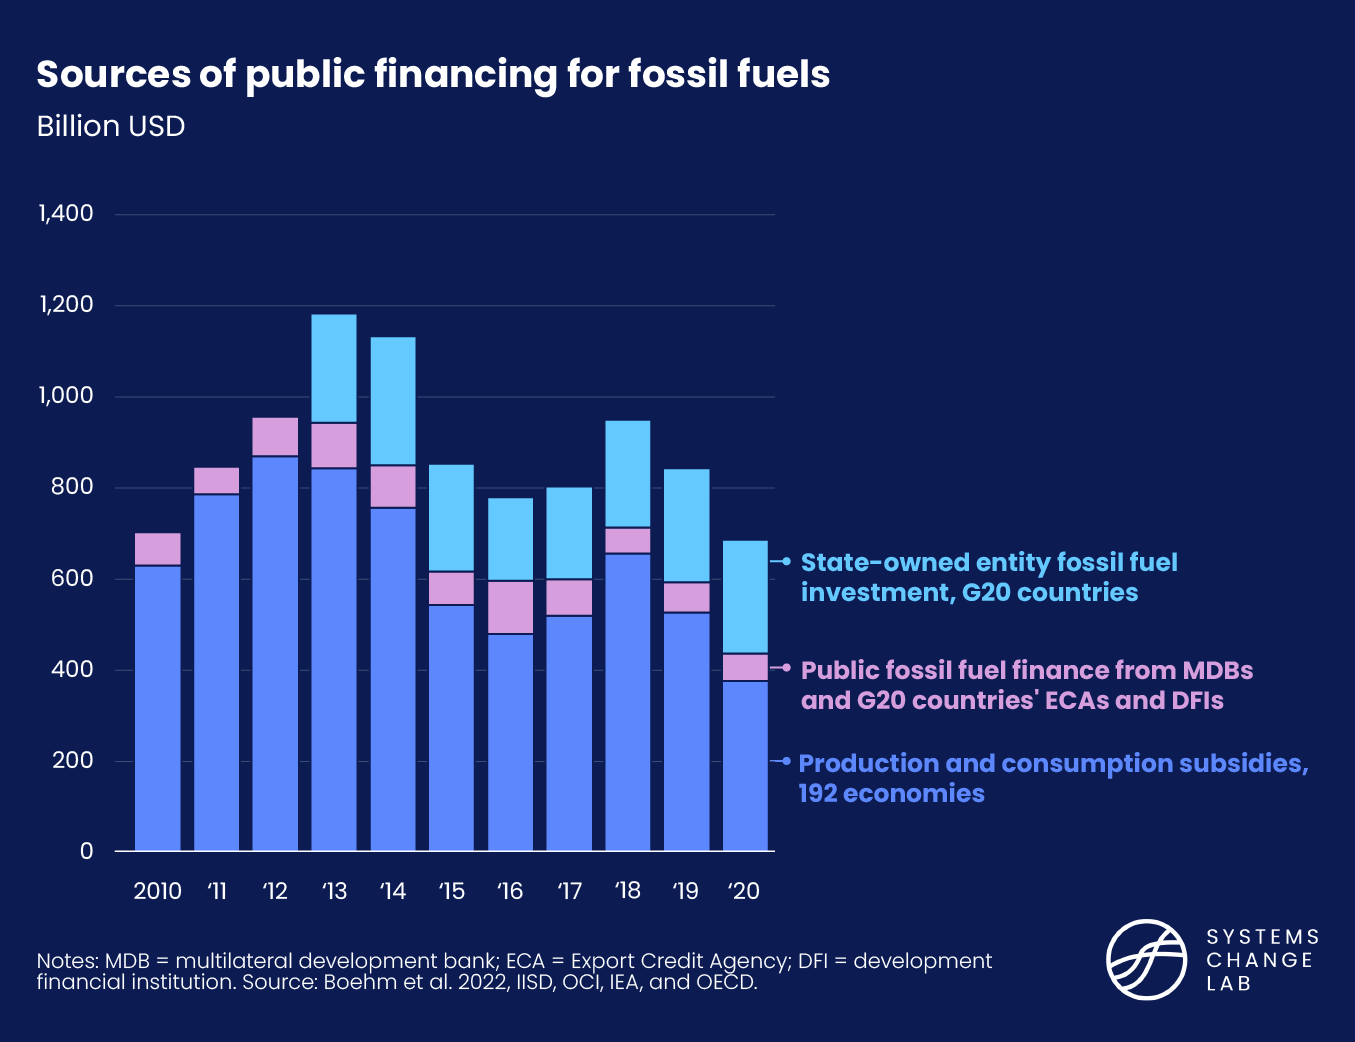 Sources of public financing for fossil fuels